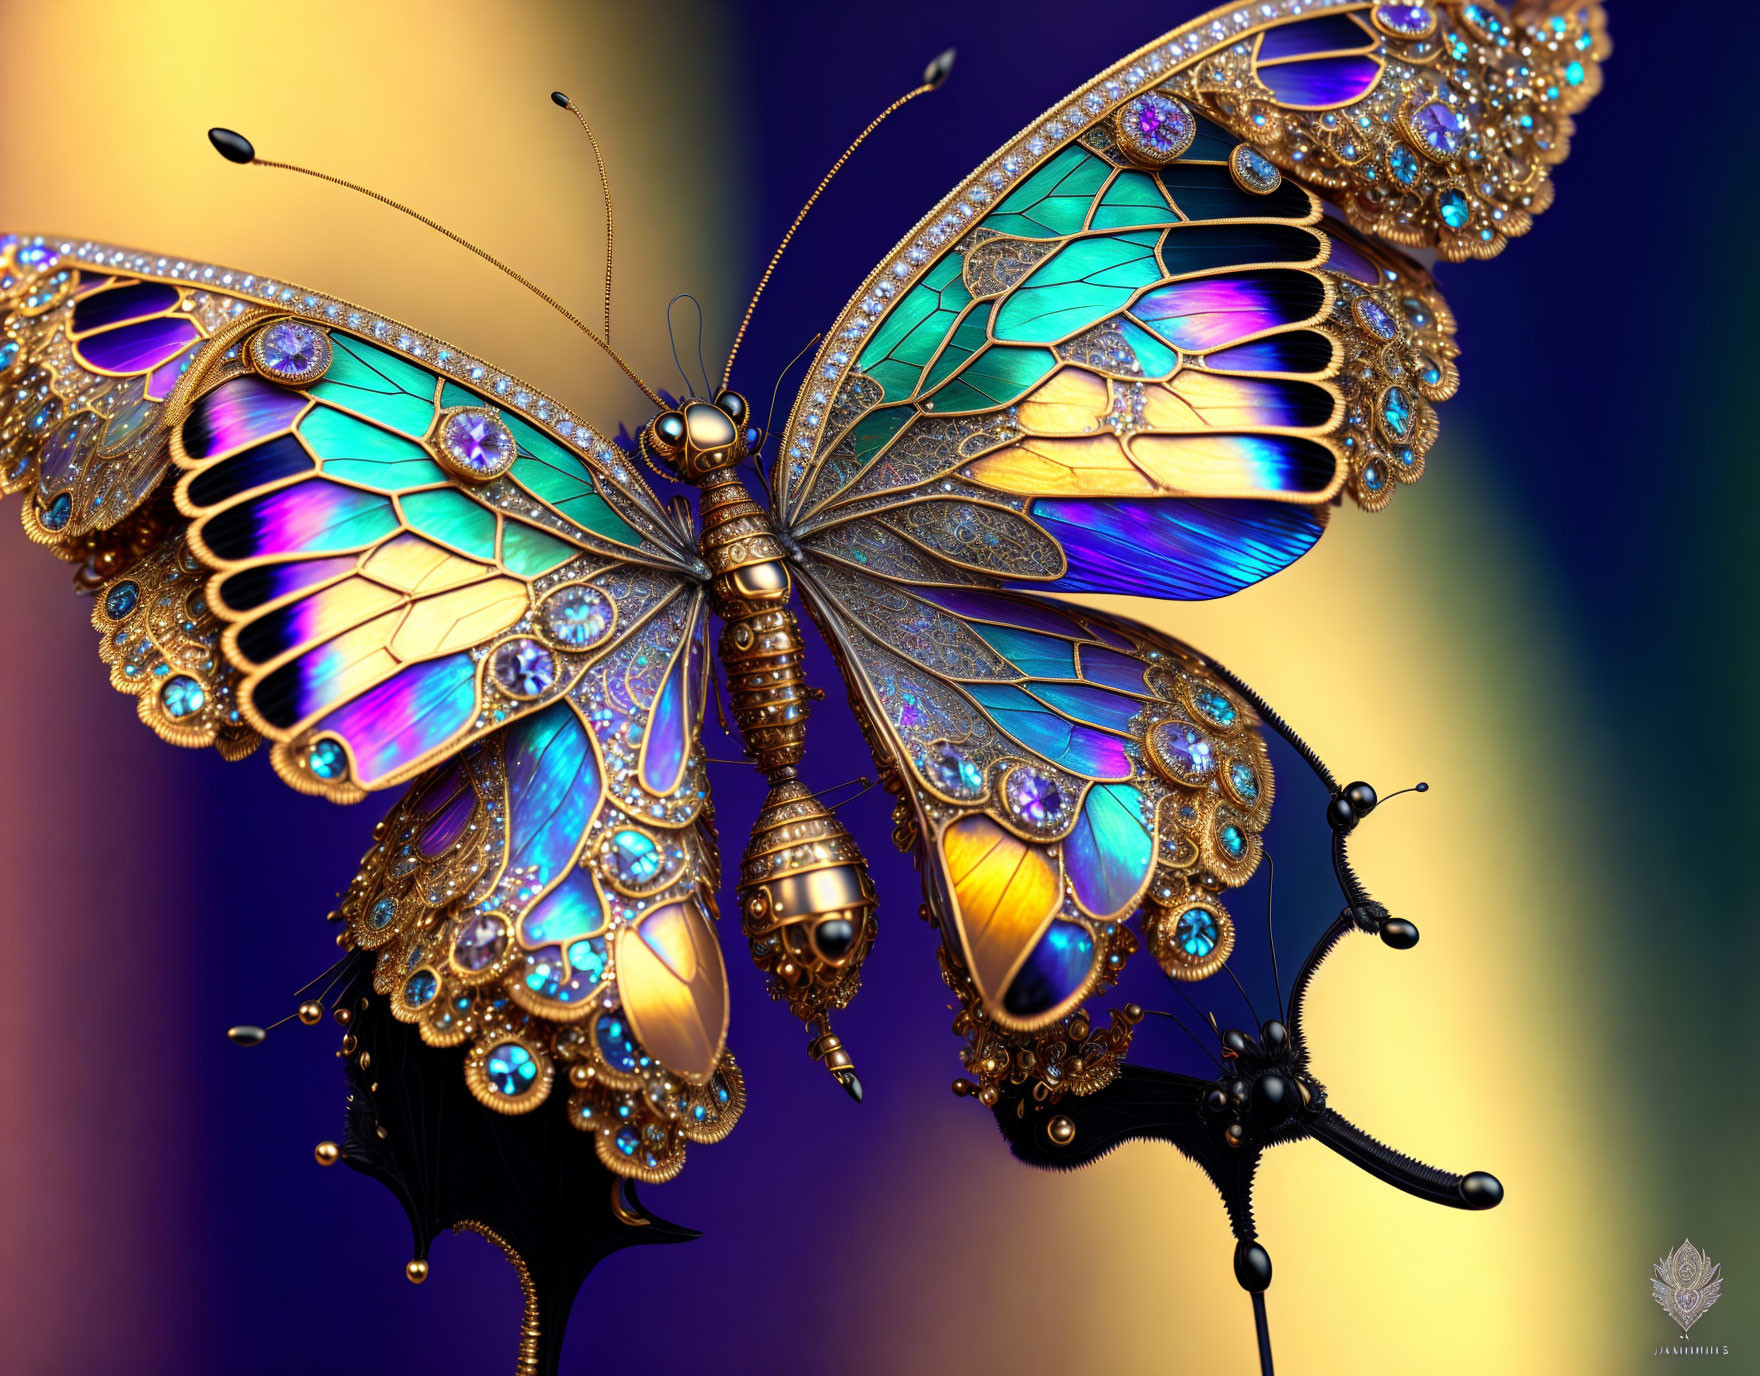 Iridescent Blue and Gold Butterfly with Gem-like Details